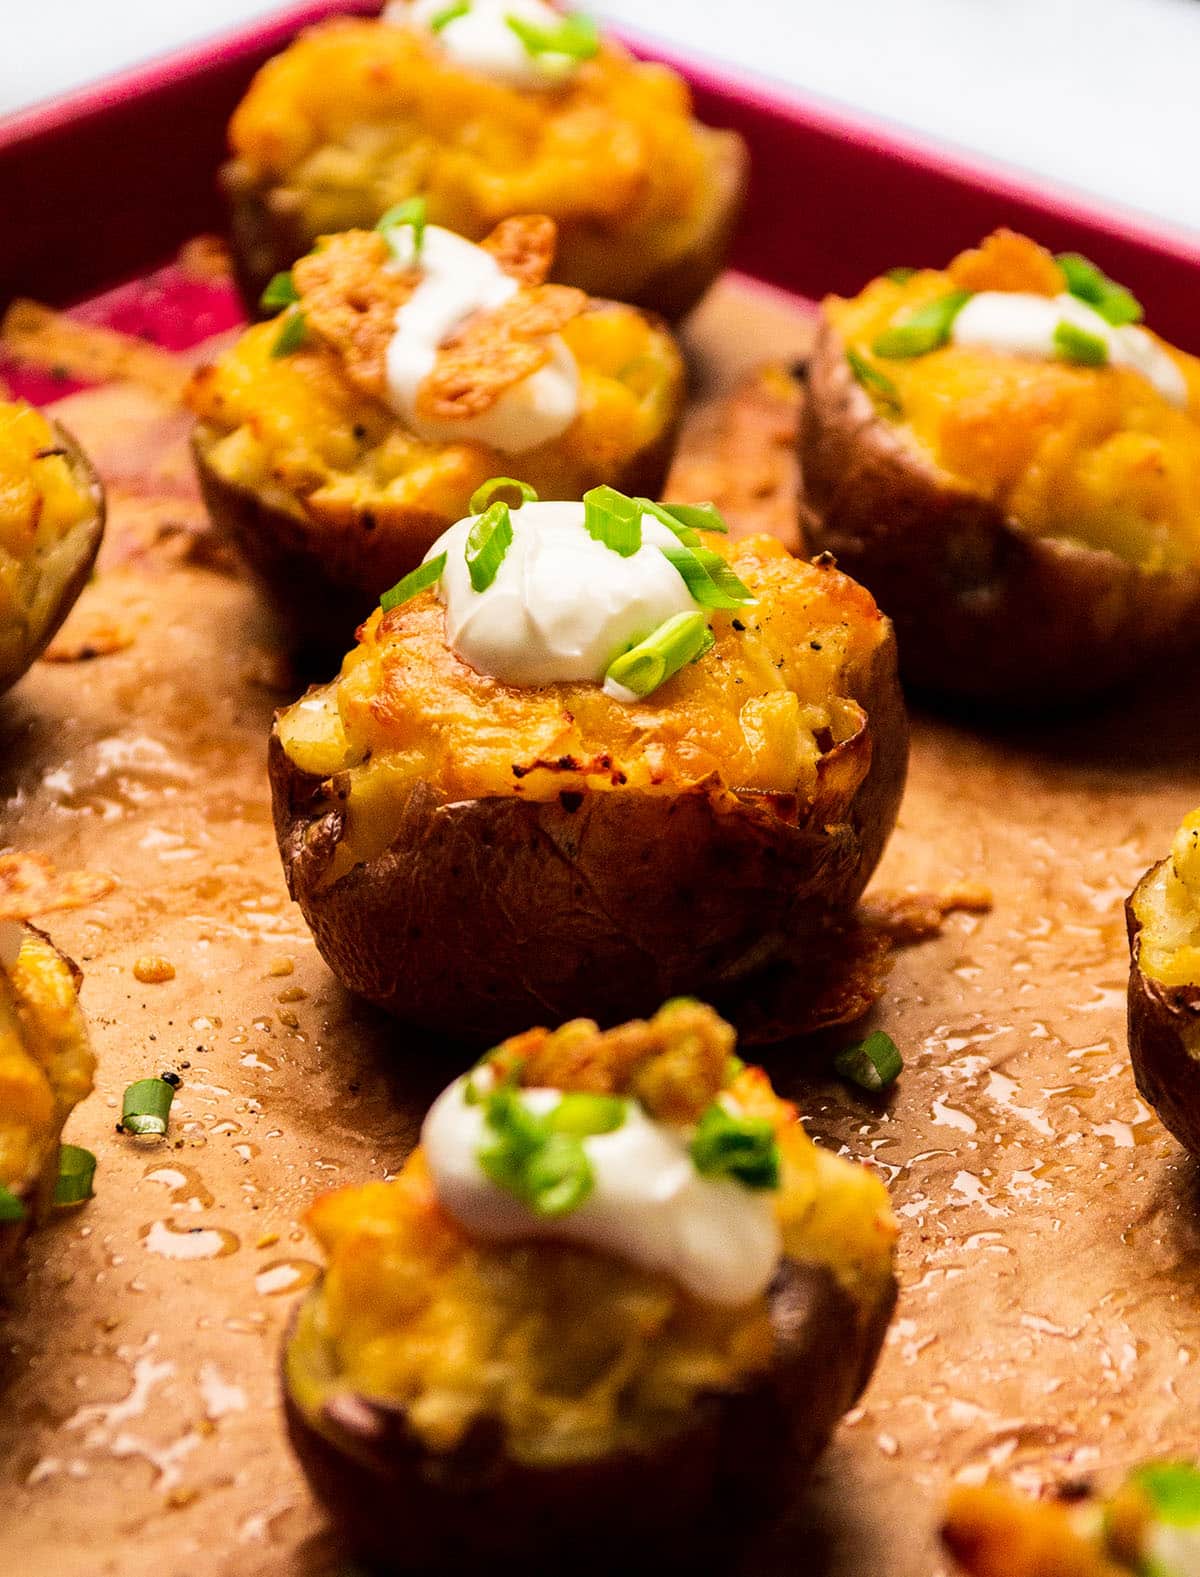 Twice baked potatoes on a baking sheet lined with parchment paper.